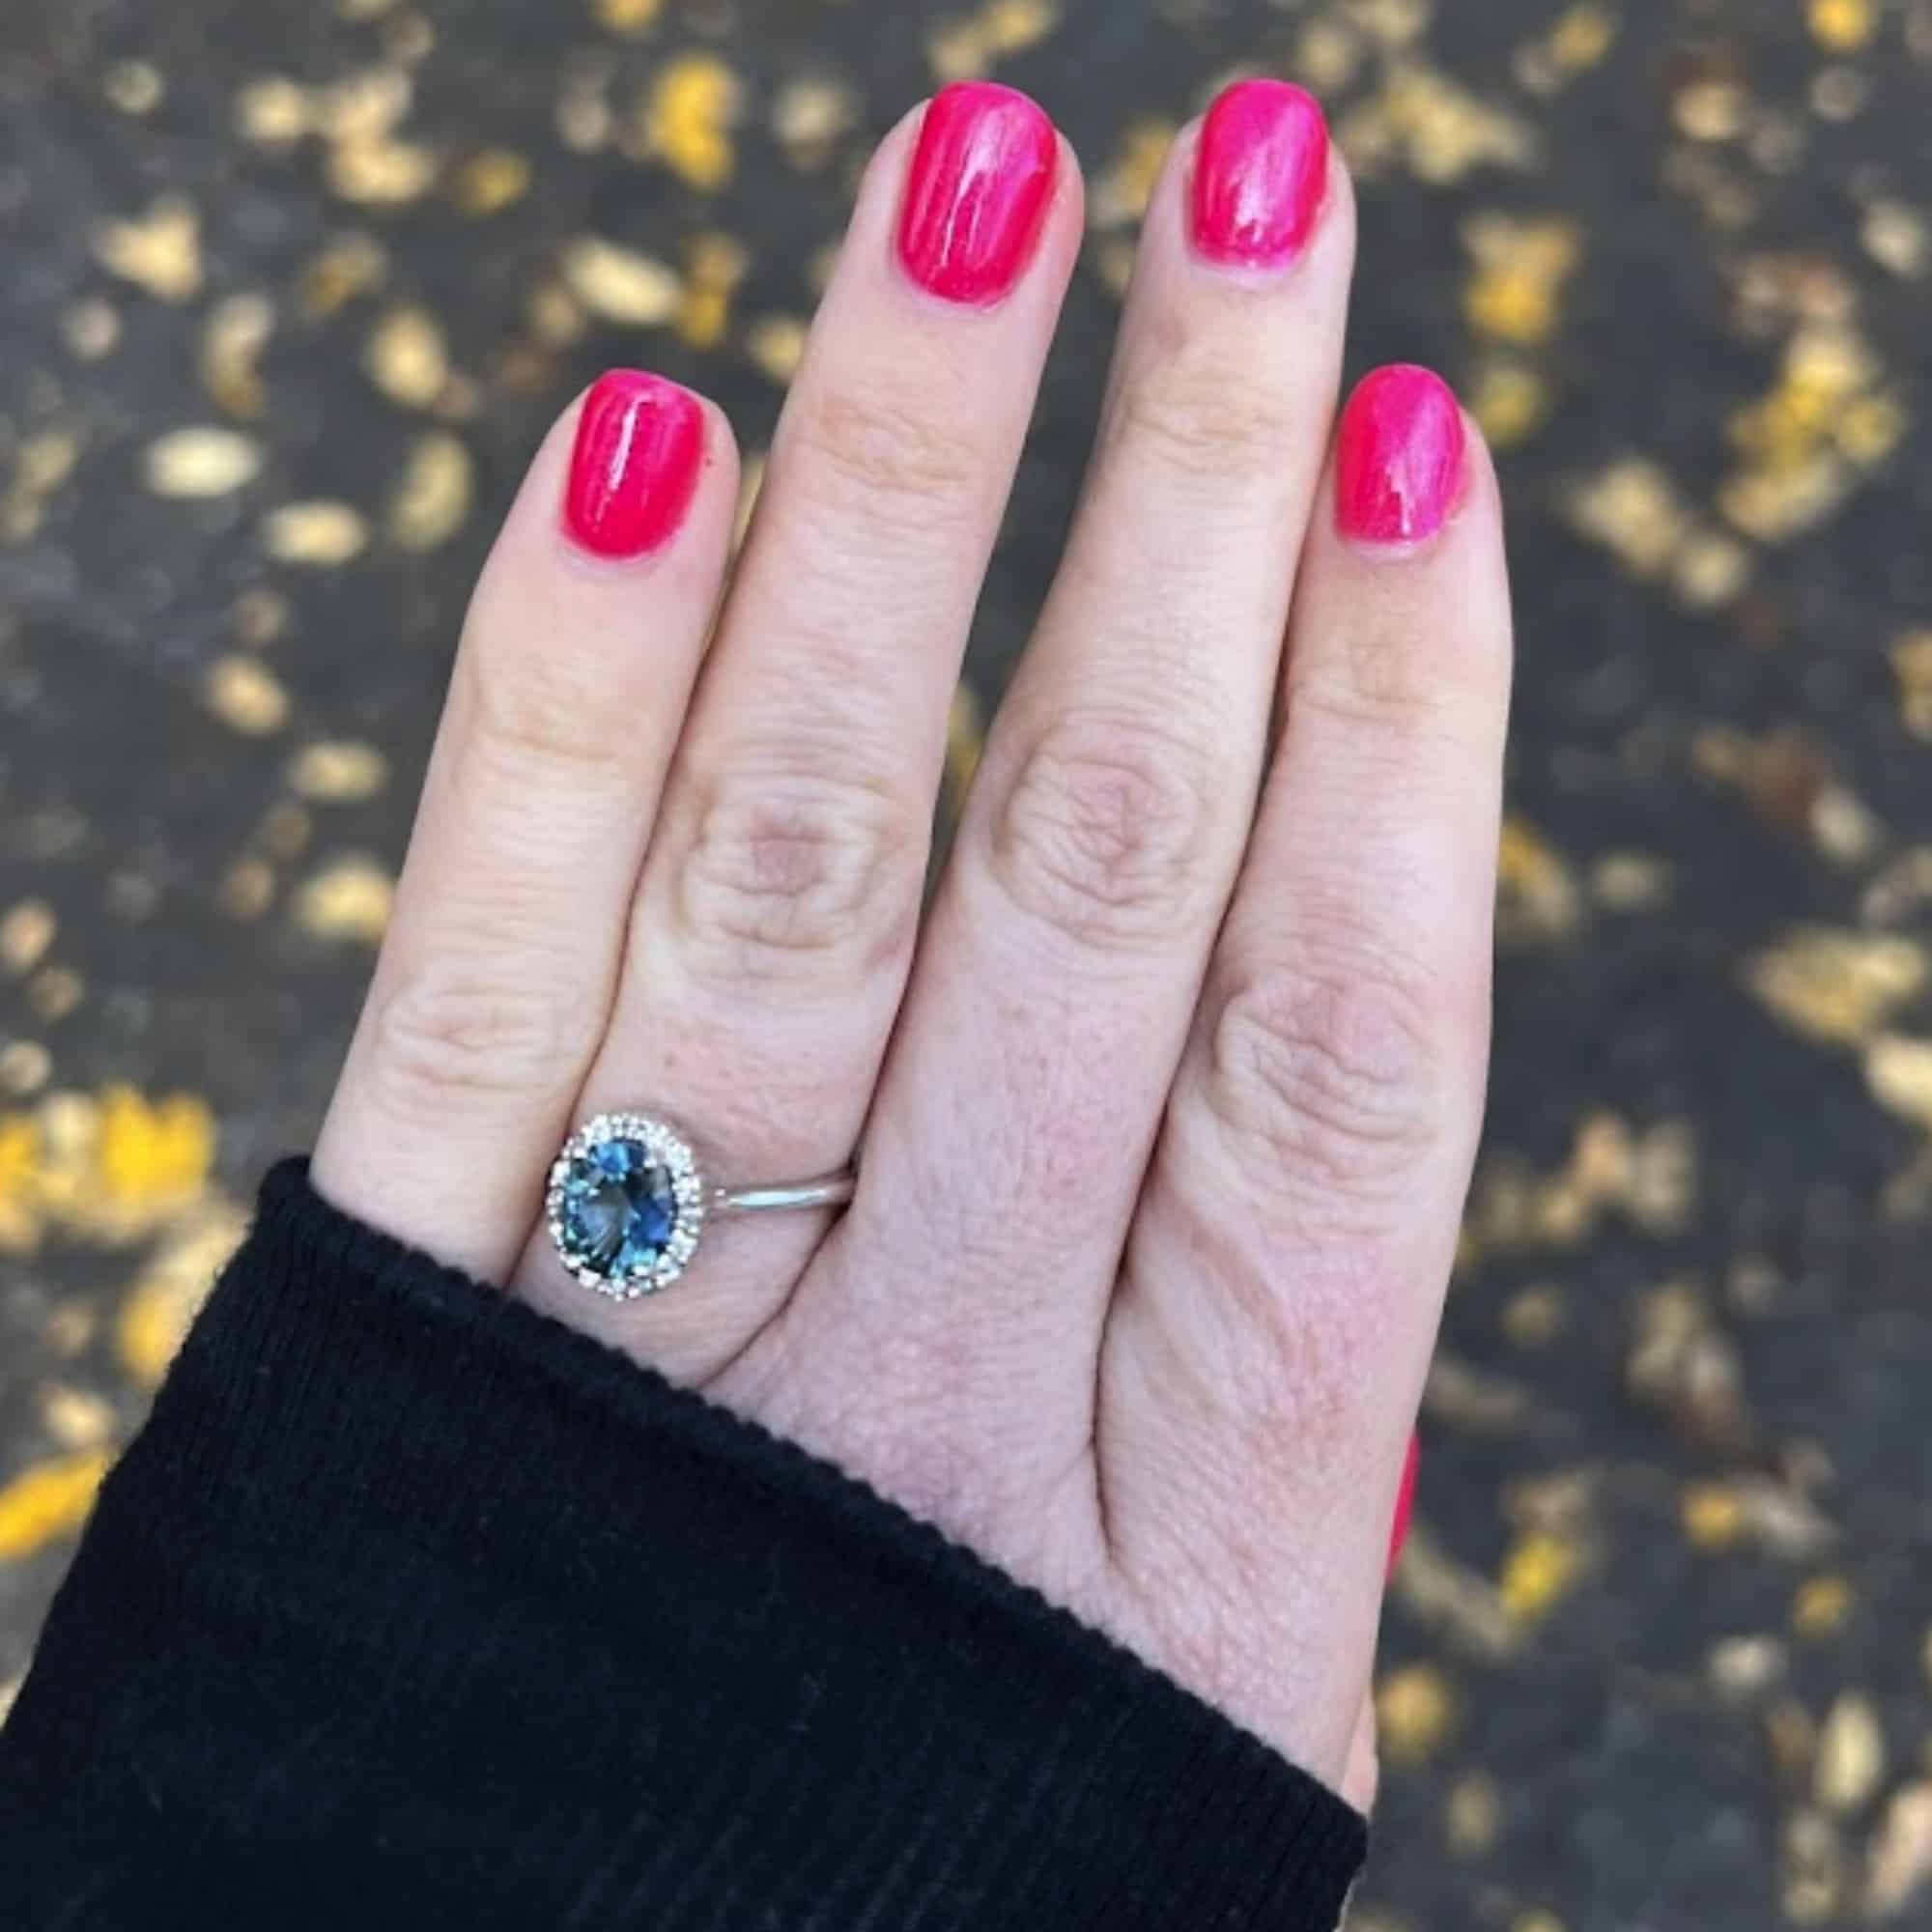 A photo from a customer review showing an "anne" ring with large teal Montana sapphire on a hand with hot pink nails against a ground scattered with fall leaves.